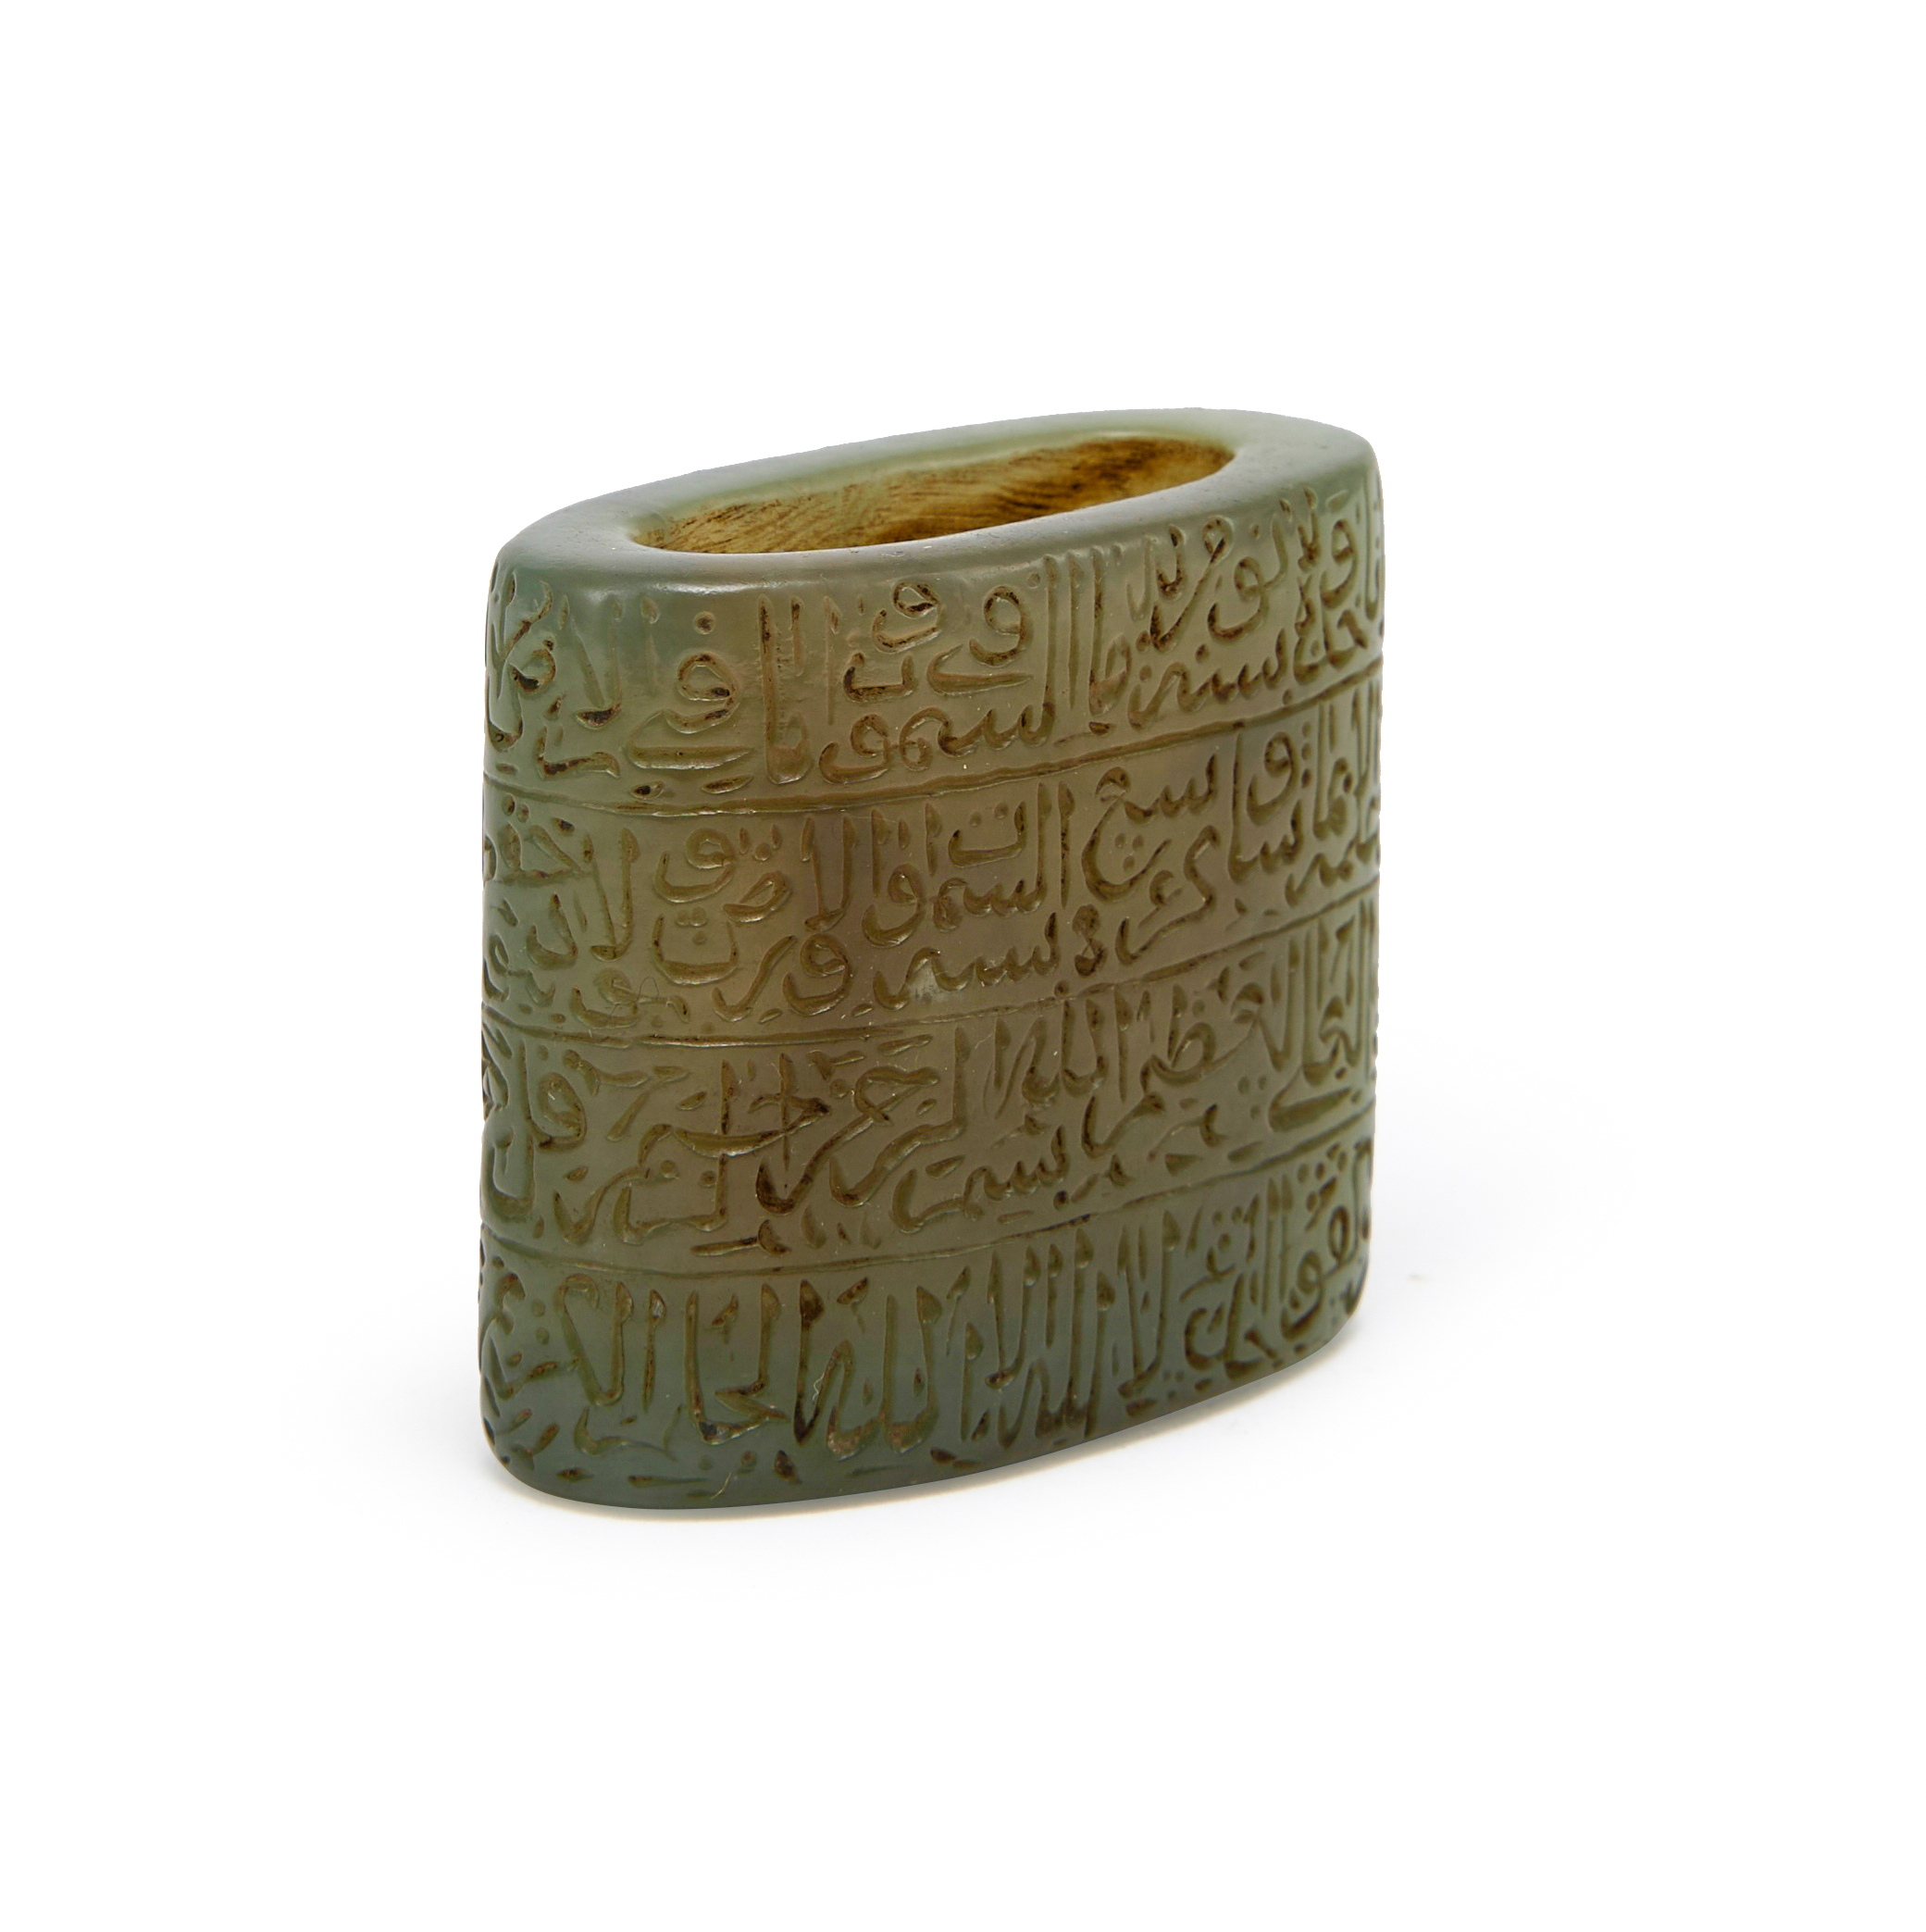 A RARE CALLIGRAPHIC INSCRIBED JADE INKWELL, 18TH CENTURY, MUGHAL, INDIA - Image 4 of 7